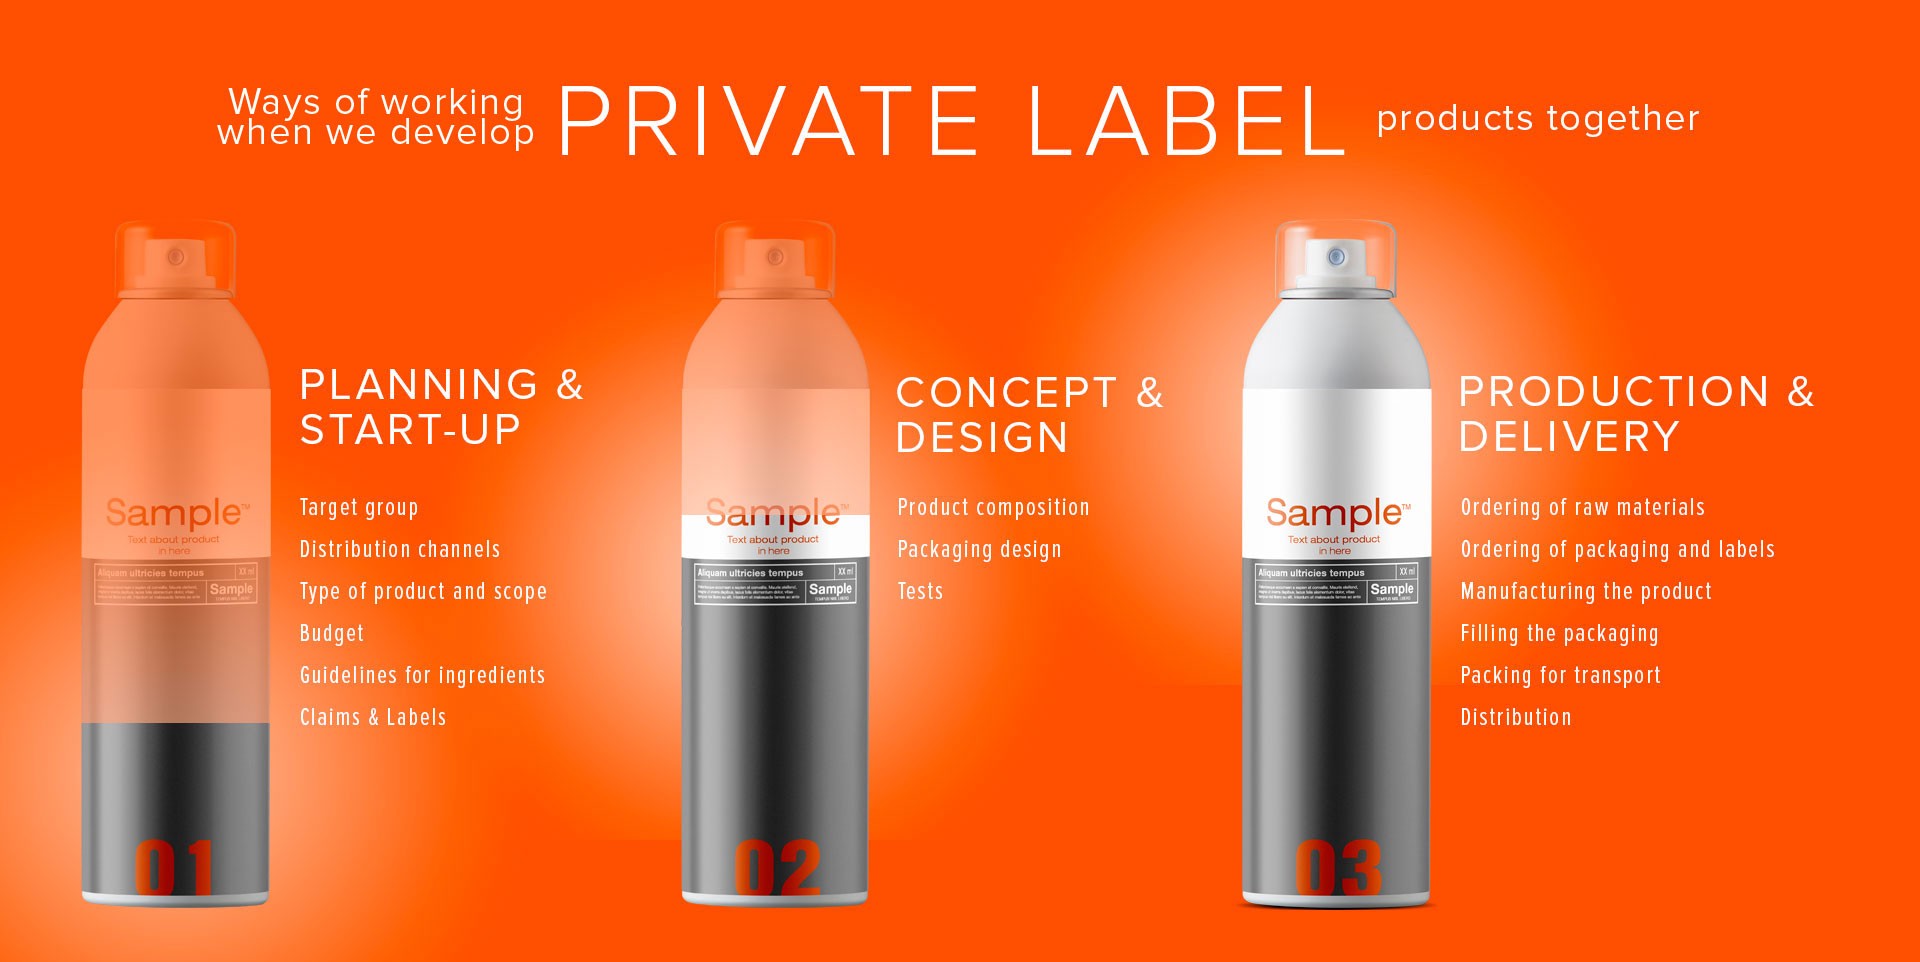 What are private label products?